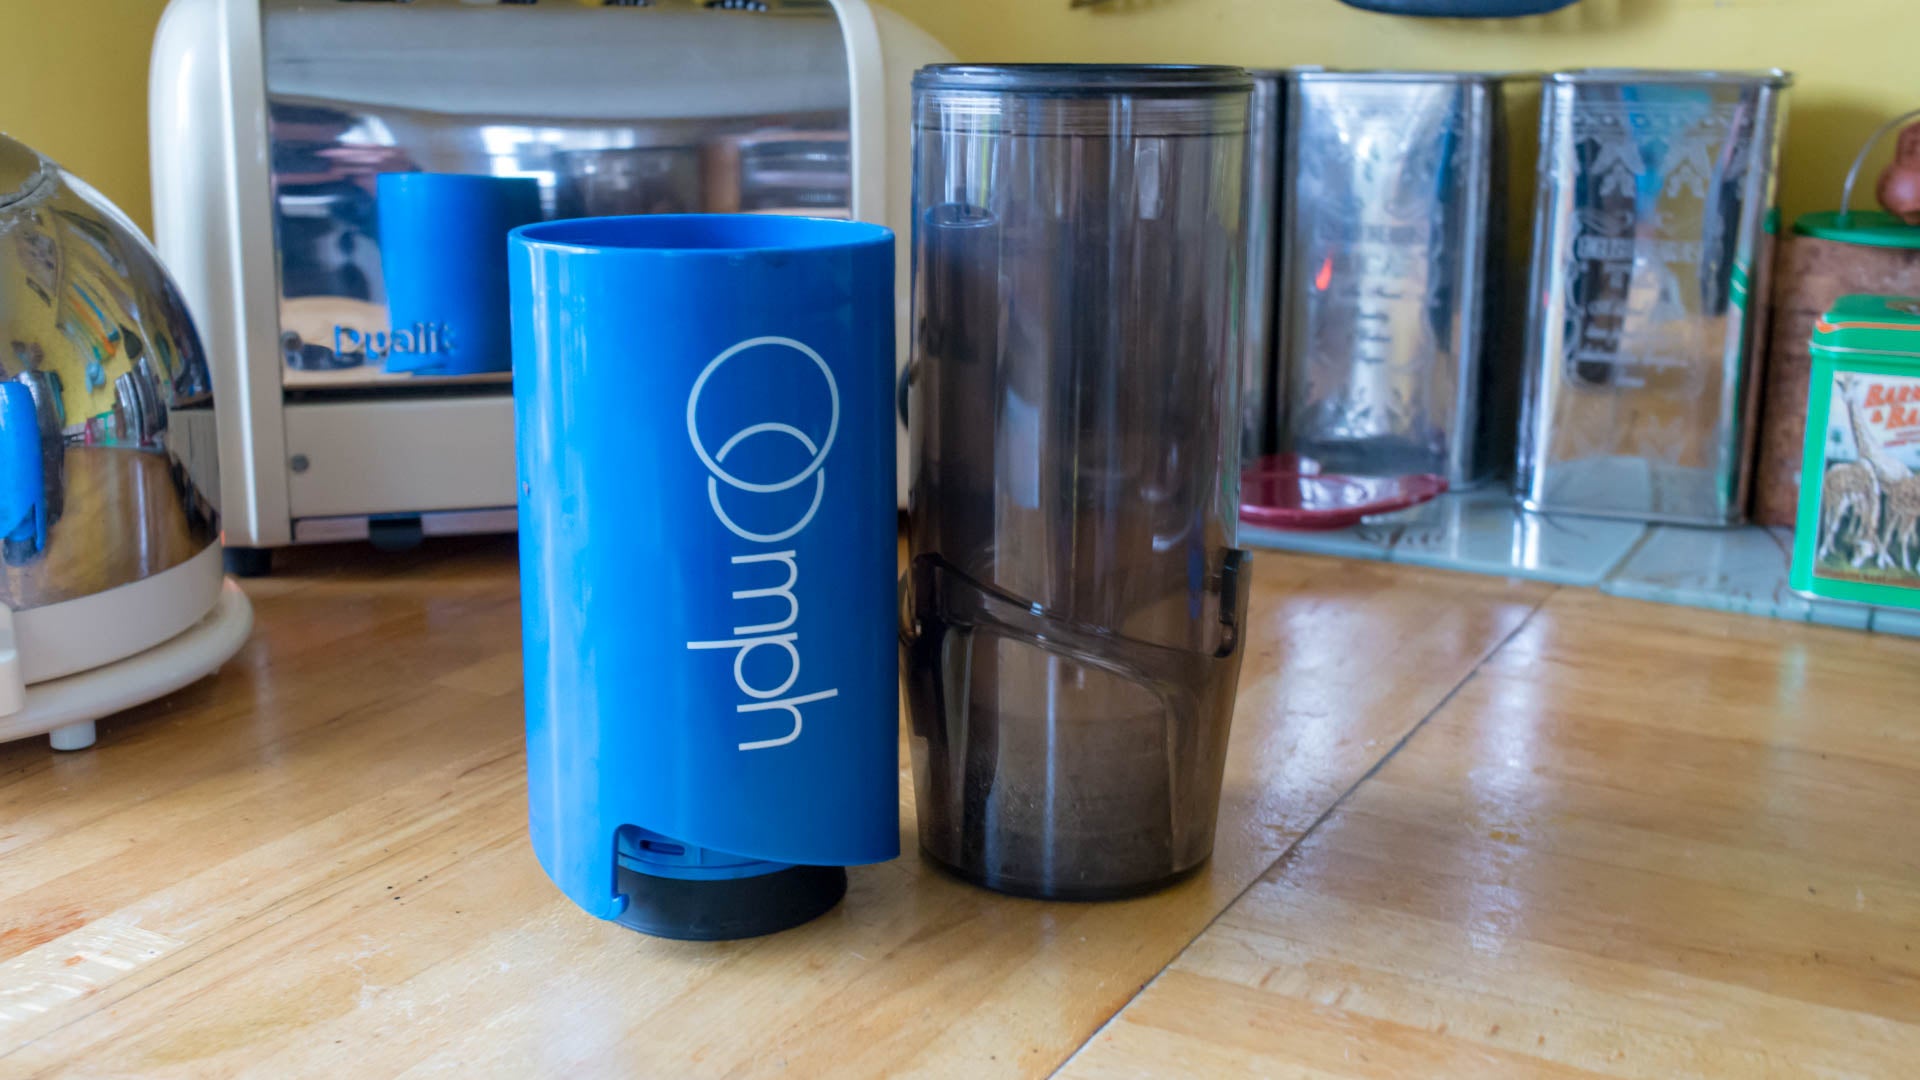 Blue Oomph Coffee Maker next to a clear coffee jug on a wooden counter.